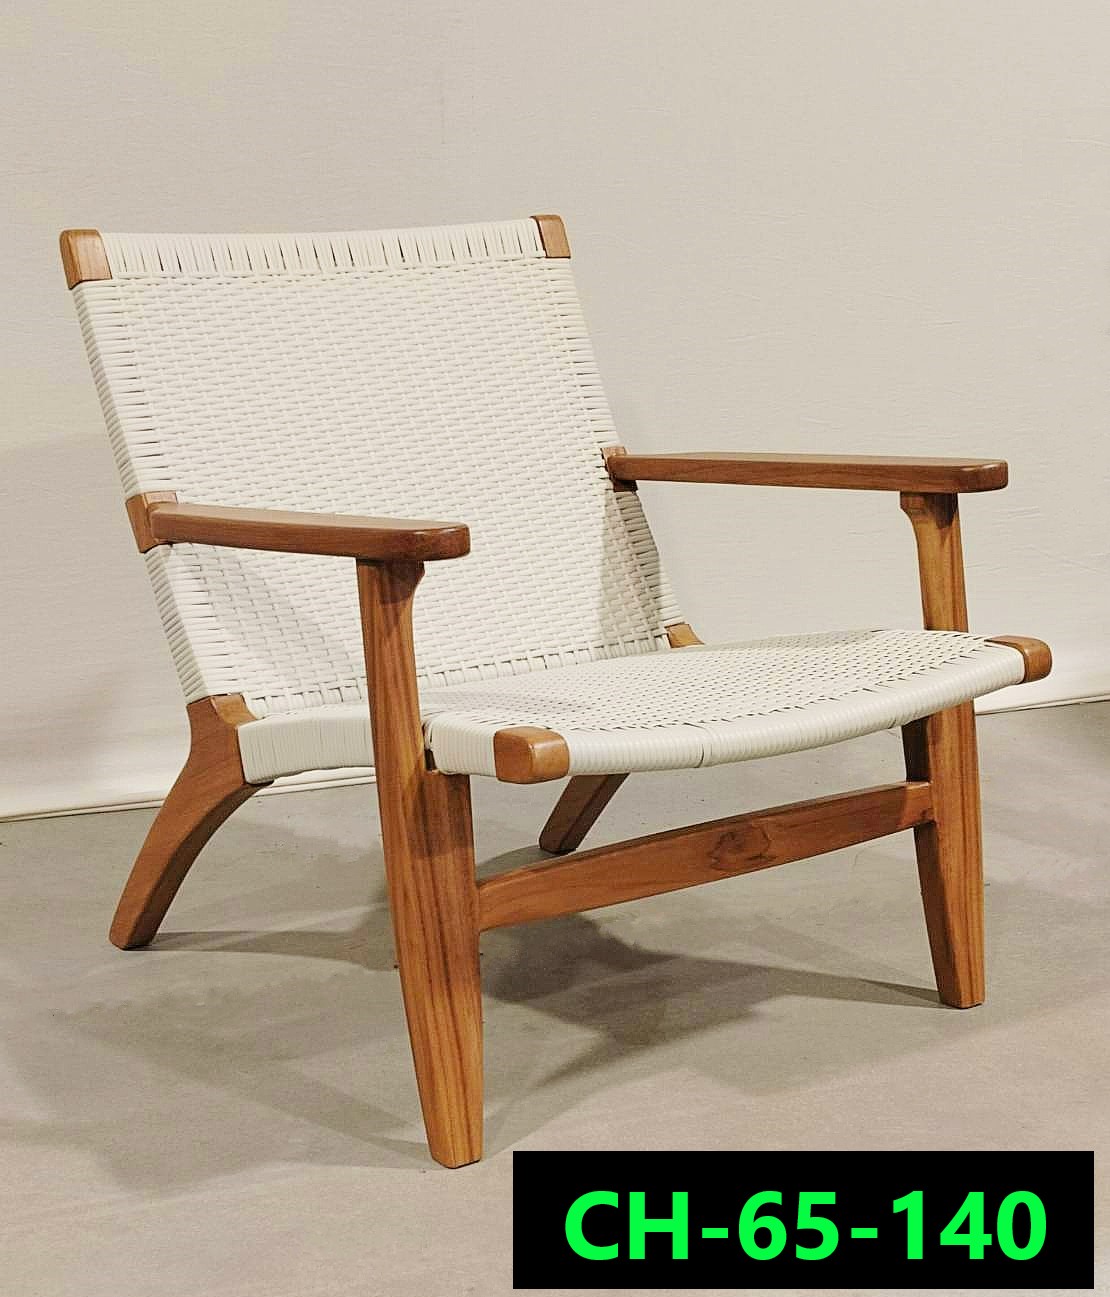 Rattan Chair set Product code CH-65-140